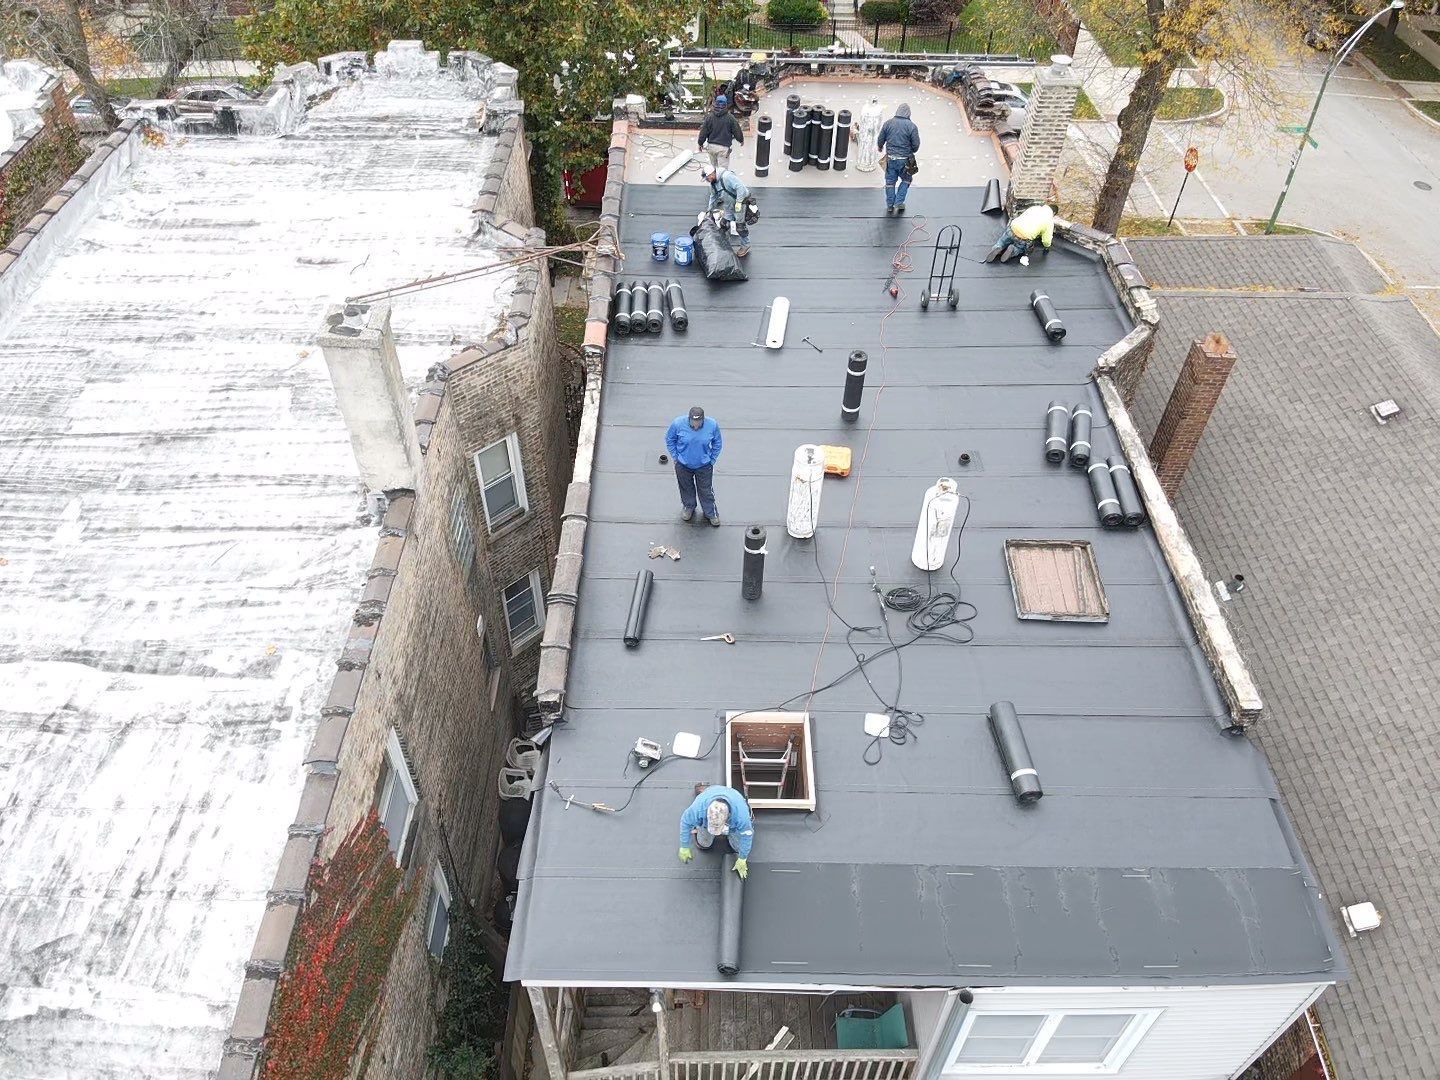 A group of people are working on the roof of a building.